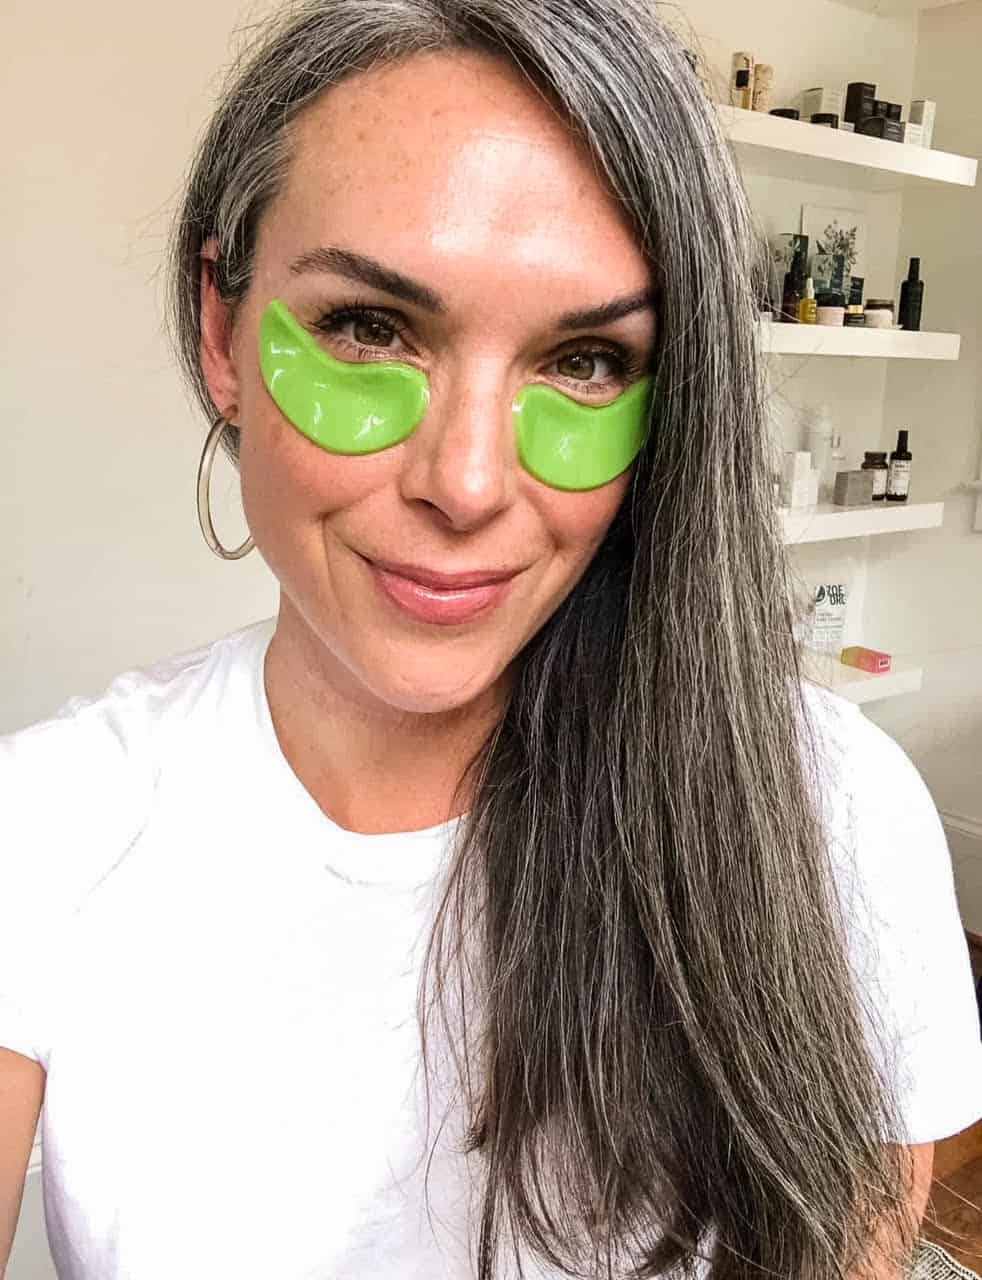 a woman wears green eye gels while smiling at the camera